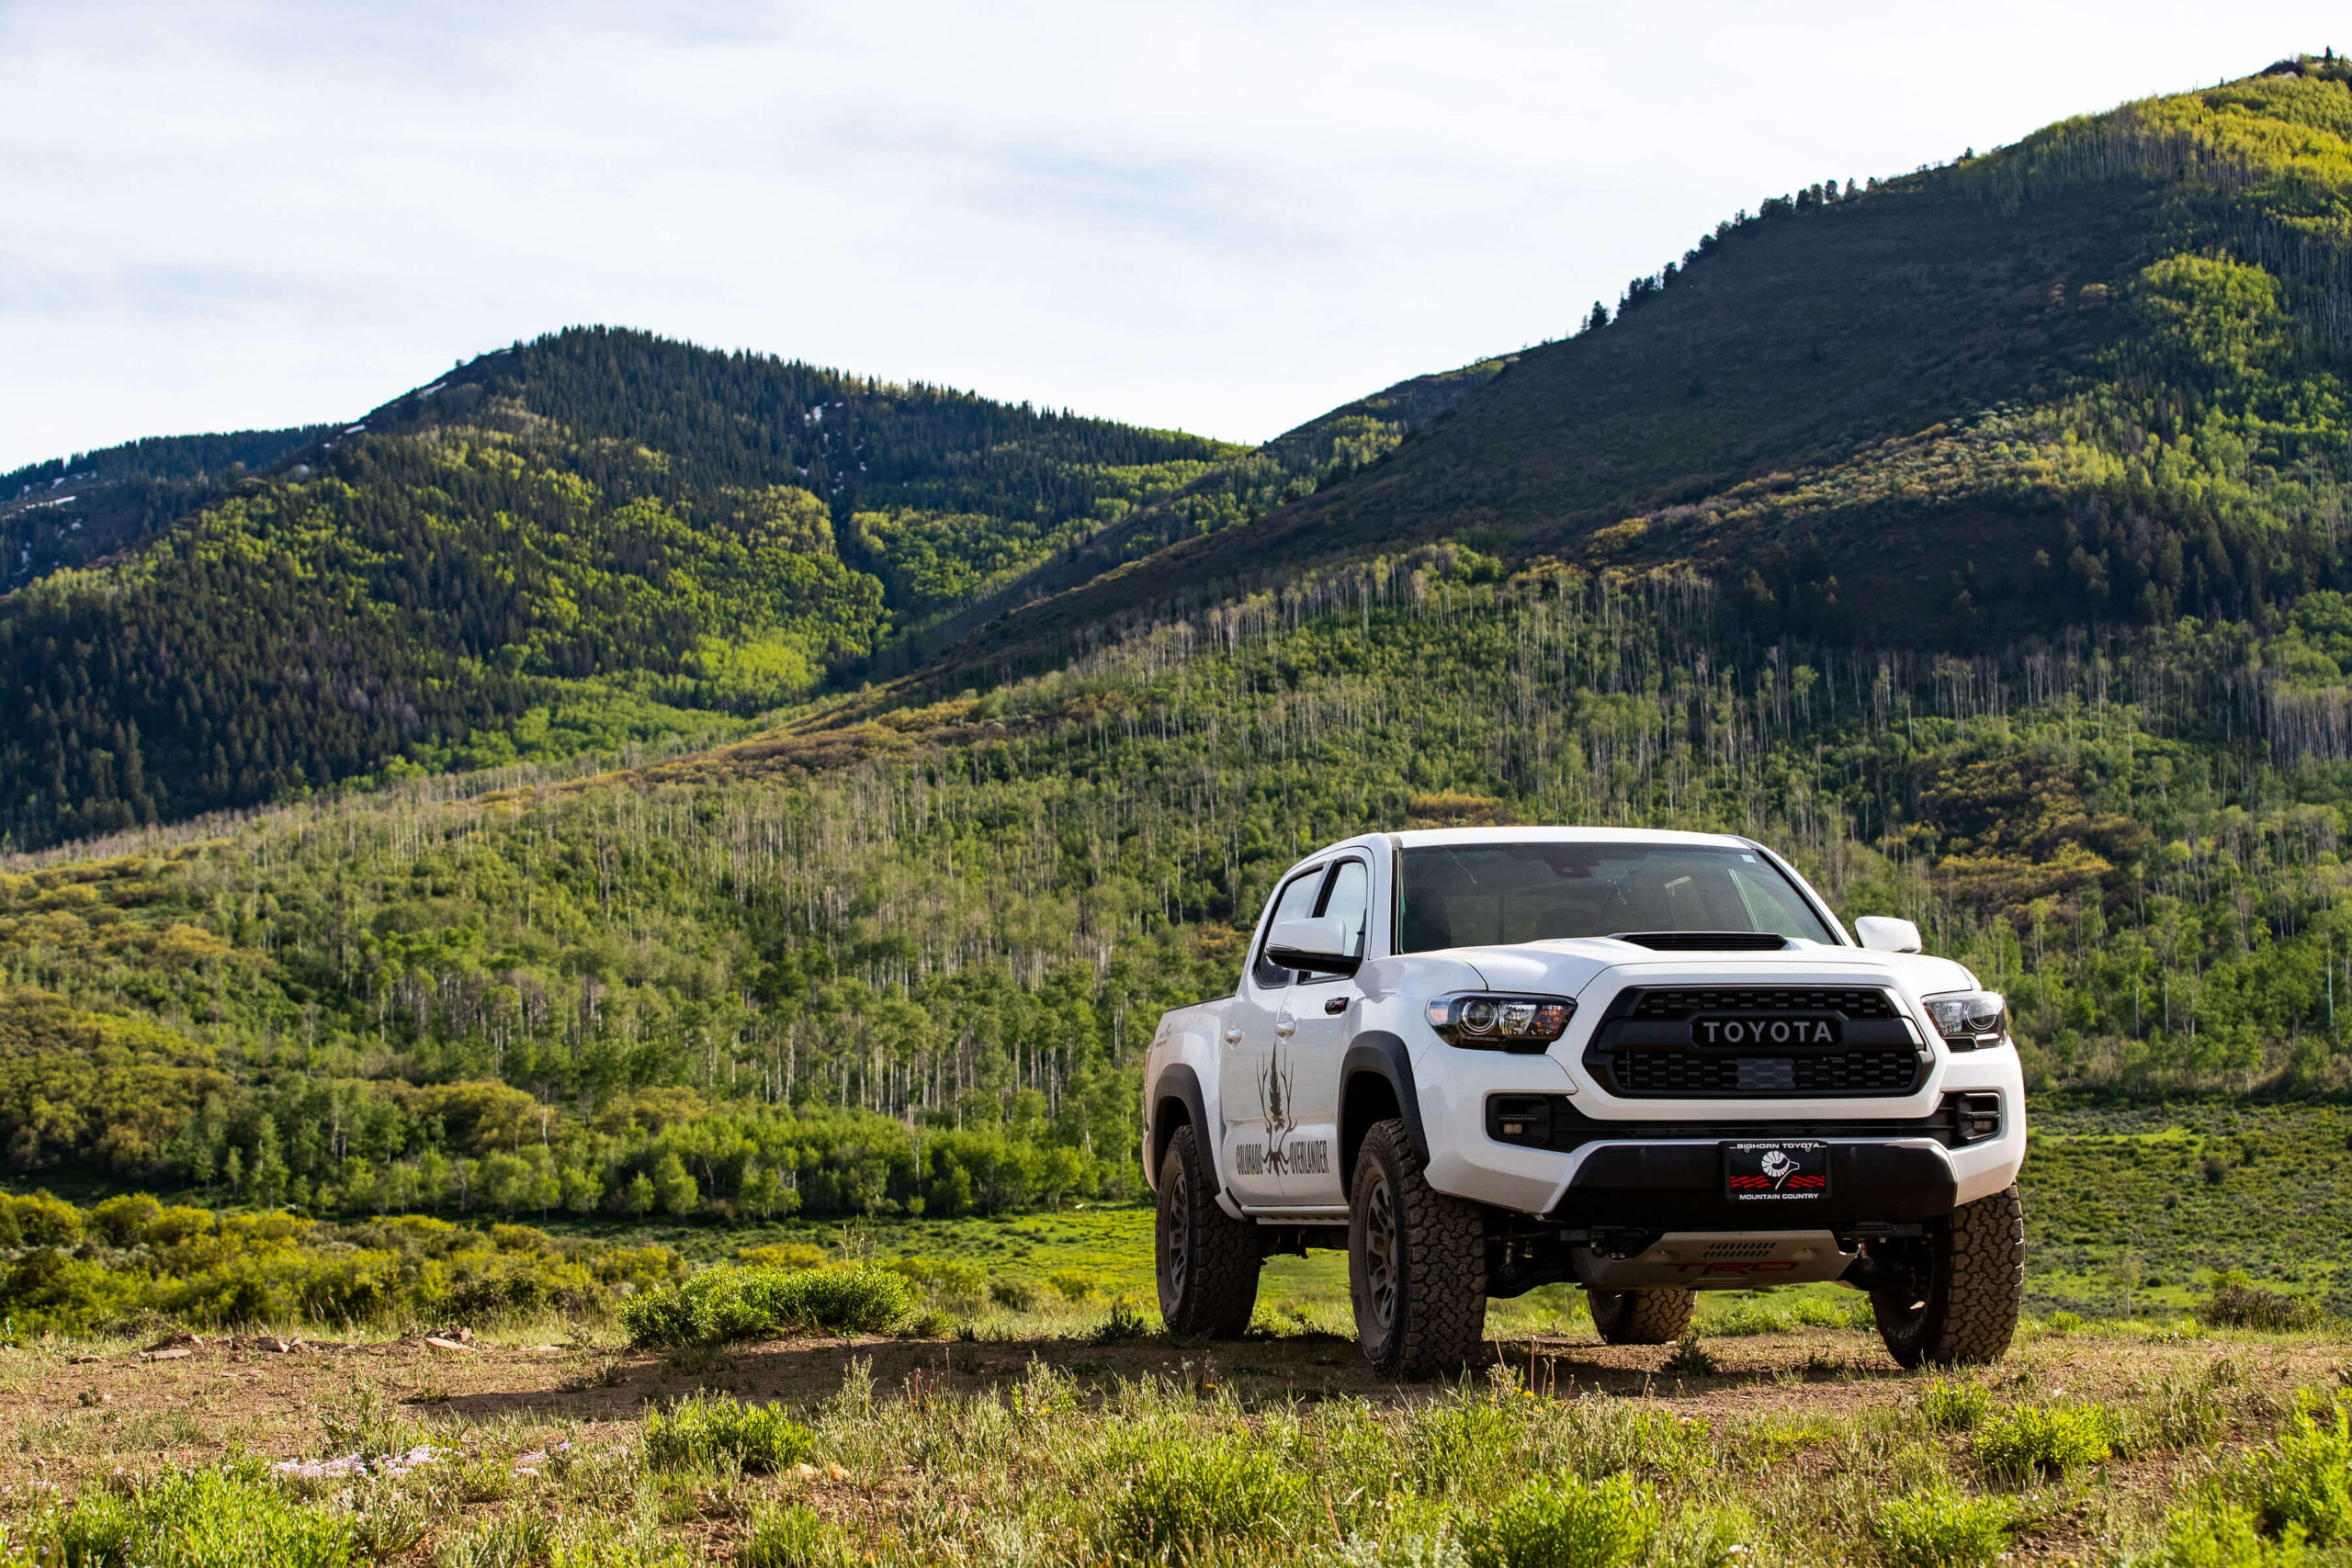 Image of the Toyota Tacoma staged in front of a green forest in the mountains